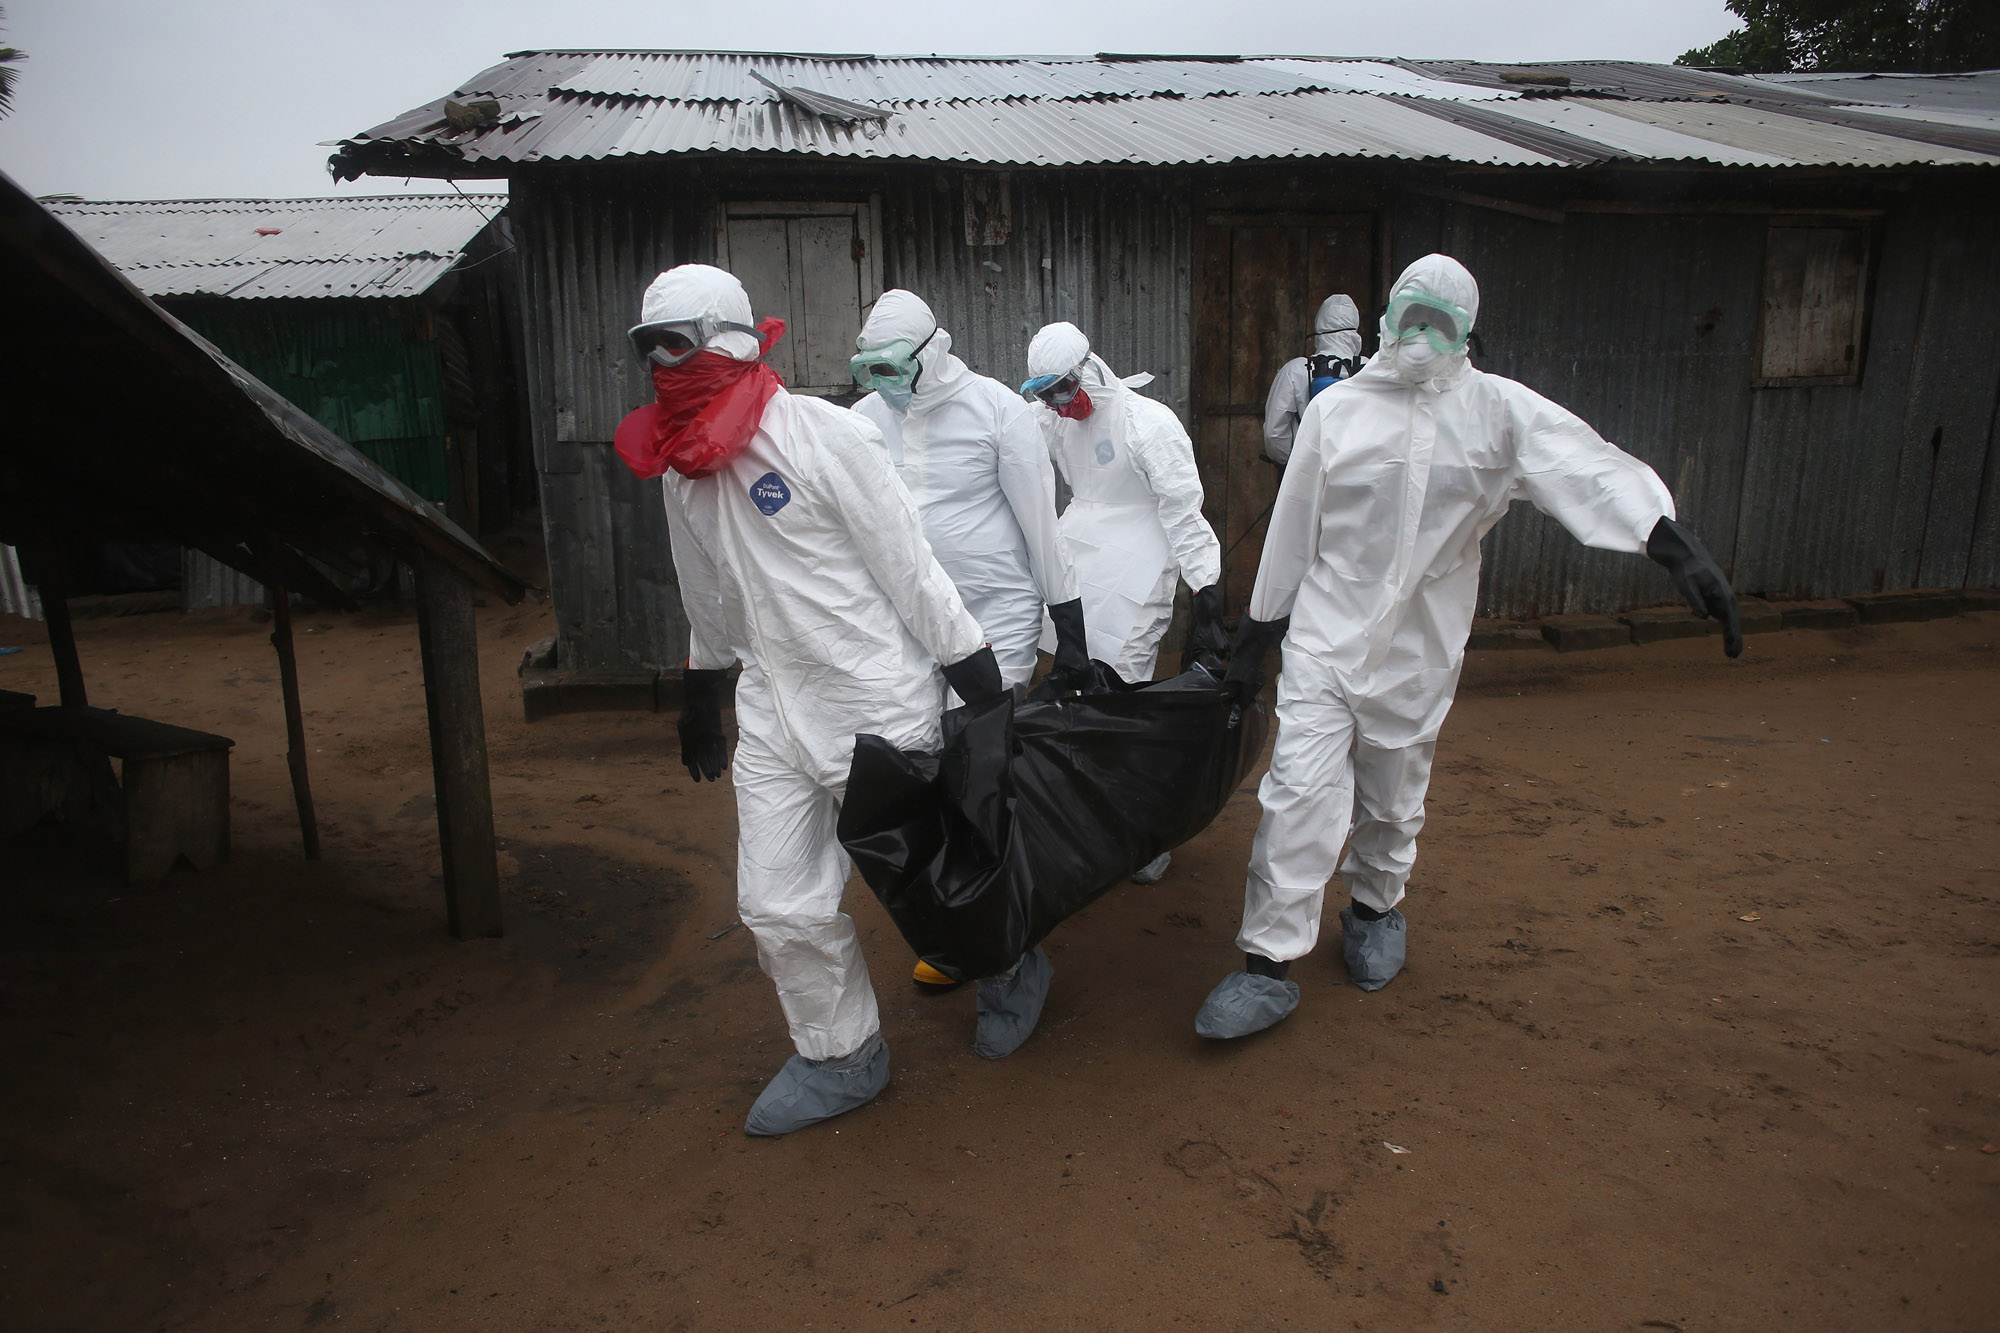 A Liberian burial team wearing protective clothing retrieves the body of a 60-year-old Ebola victim from his home on Aug. 17, 2014 near Monrovia, Liberia. (John Moore—Getty Images)